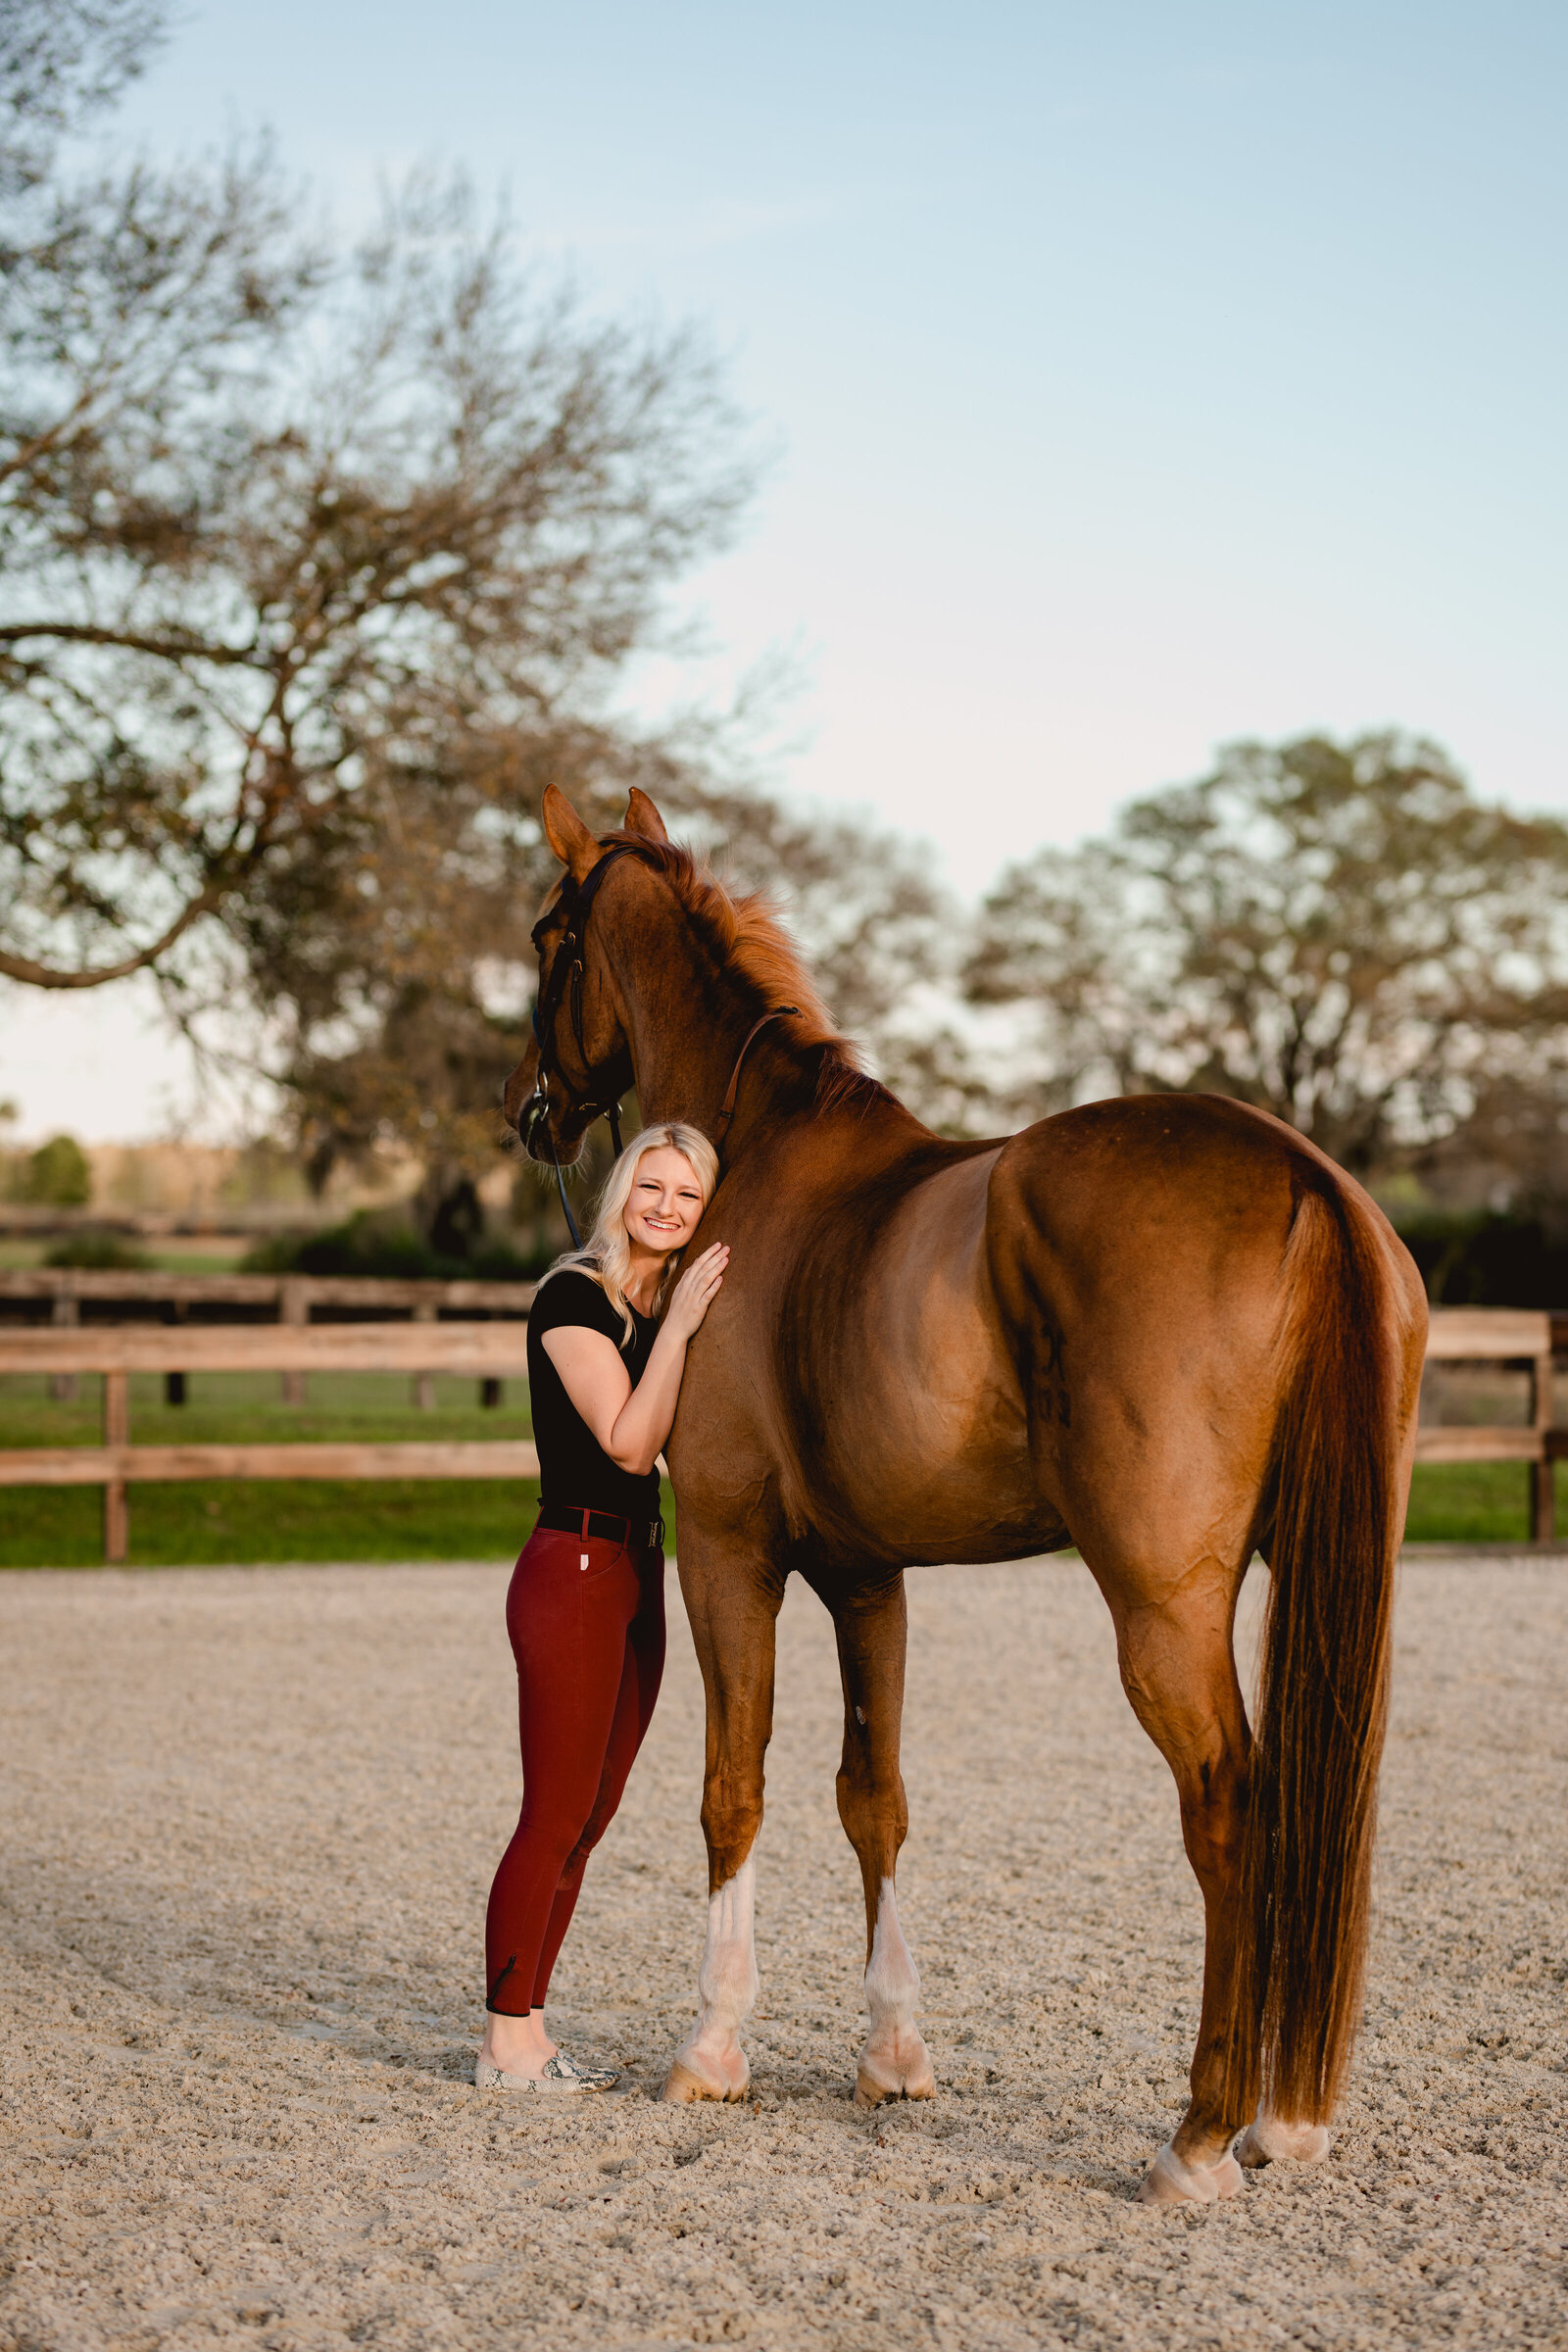 Jumper horse in Ocala FL has photoshoot with rider in equestrian clothes in the arena.